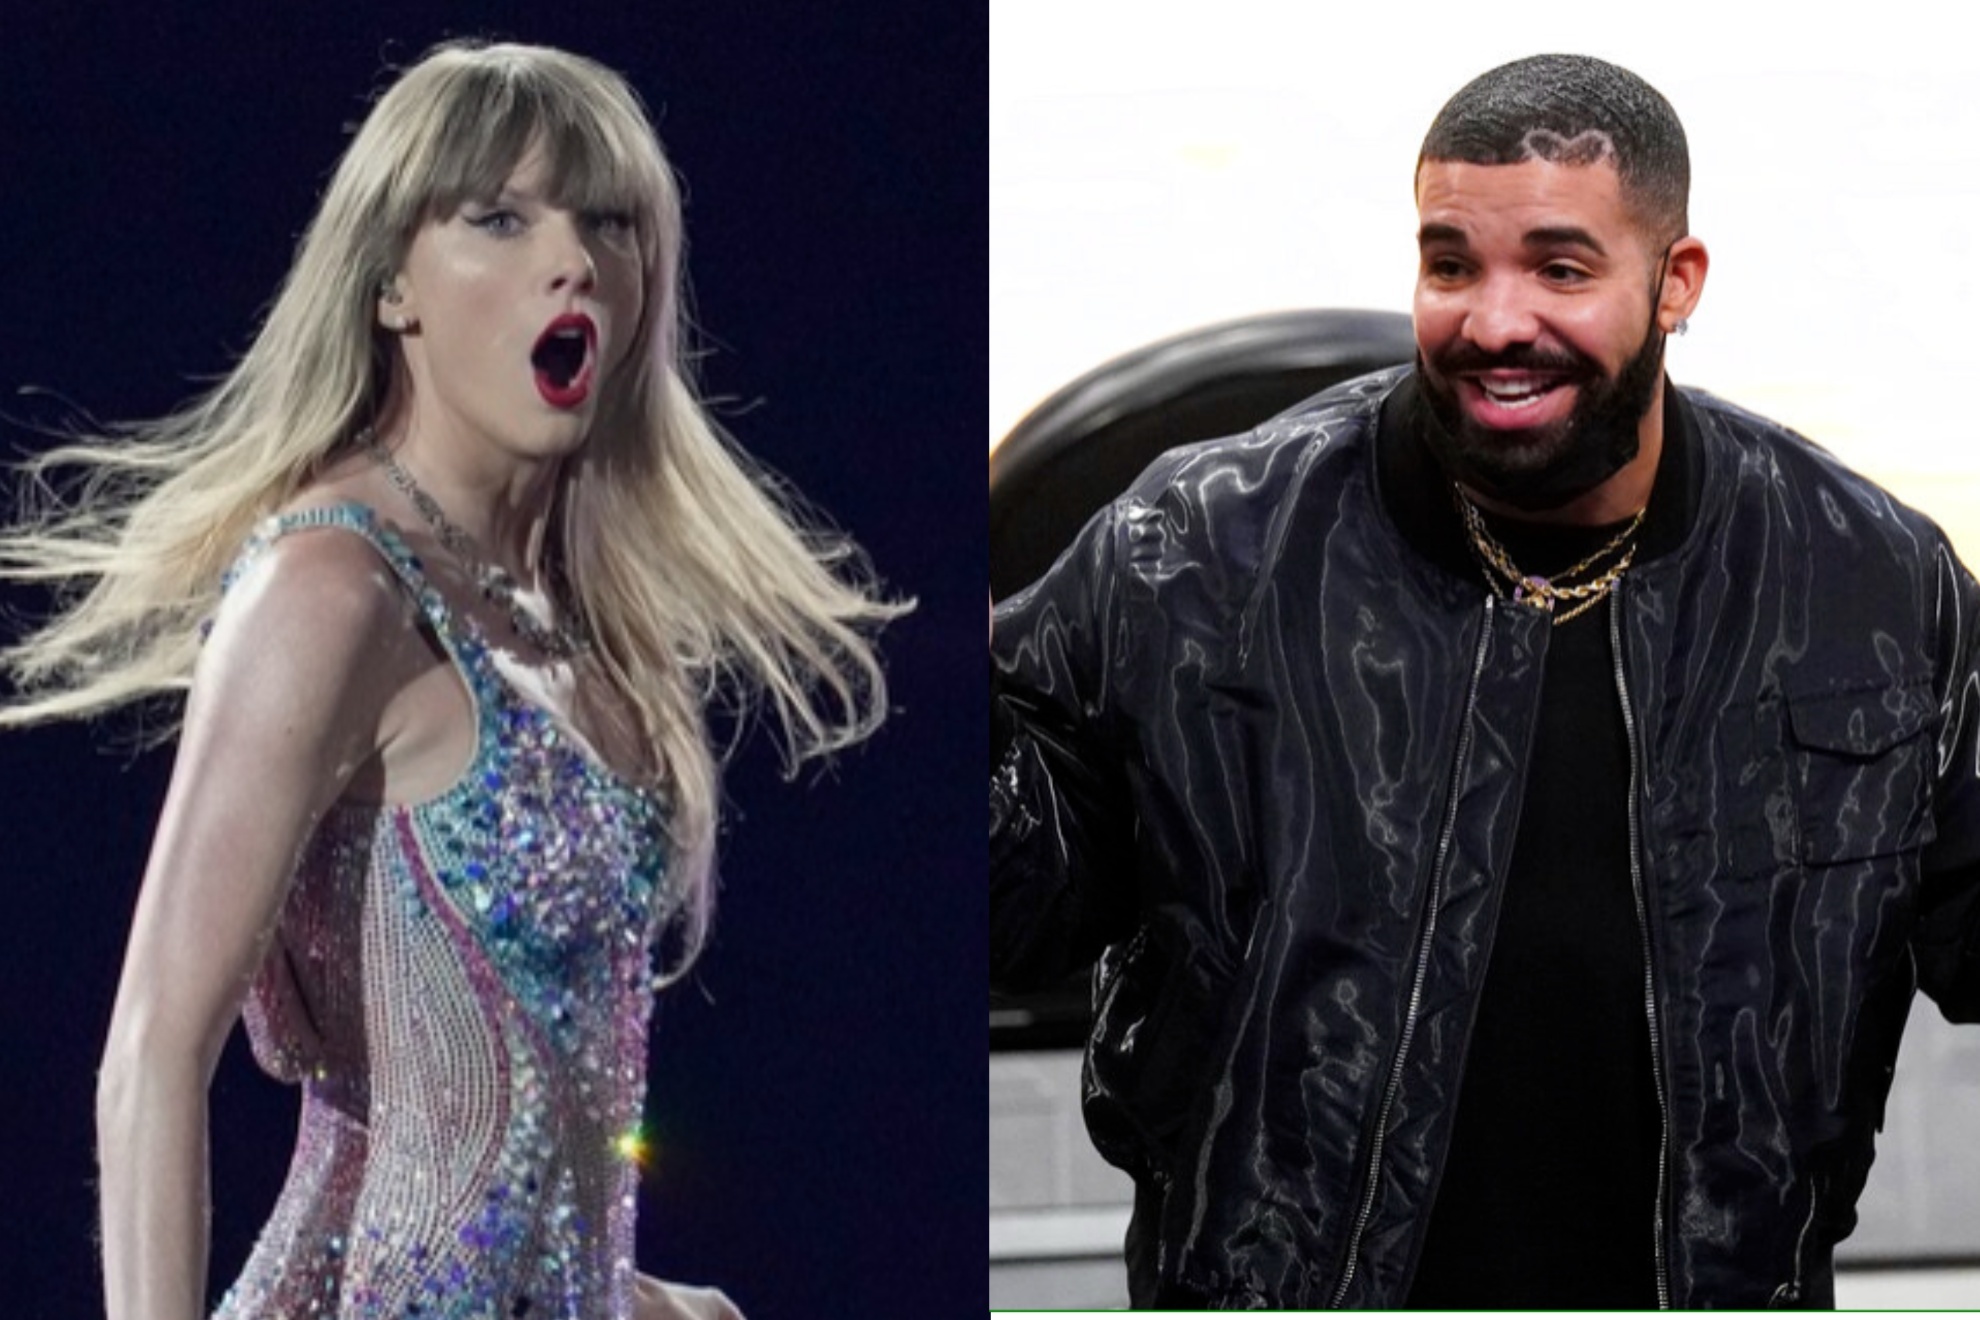 Drake name-dropped Taylor Swift in new song about Kendrick Lamar